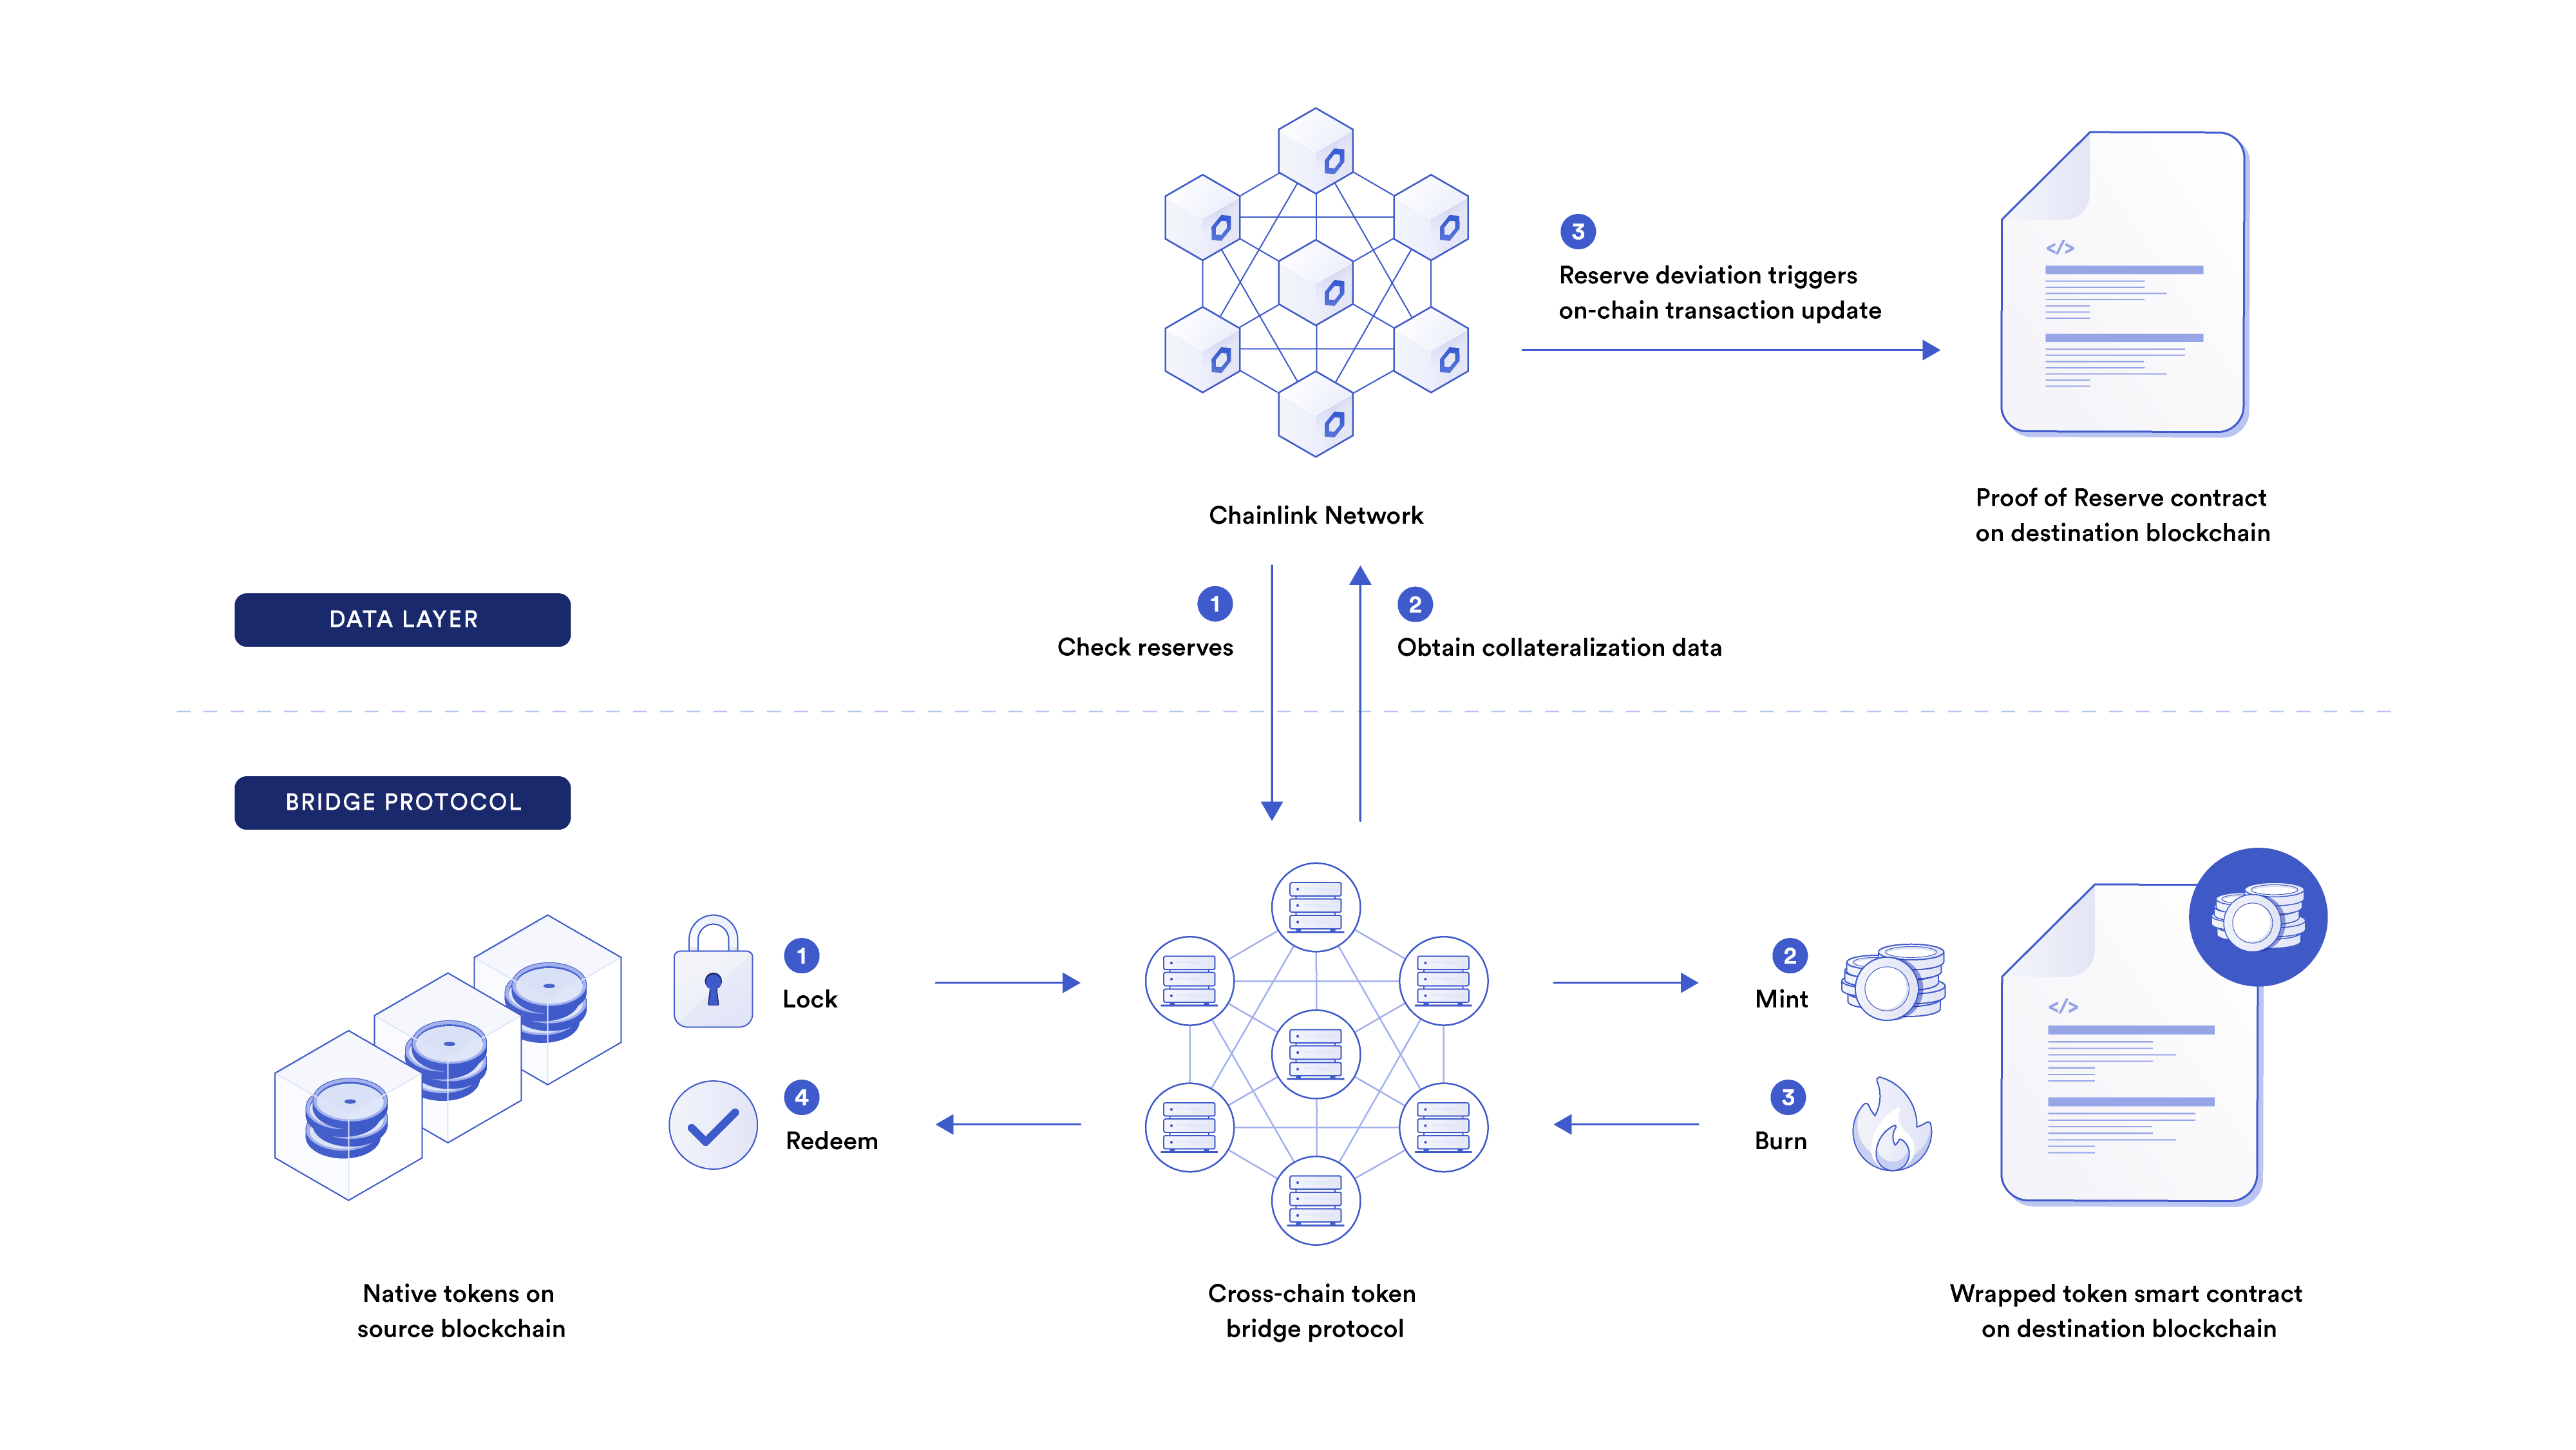 A diagram showing how Chainlink Proof of Reserve interacts with cross-chain token bridges.